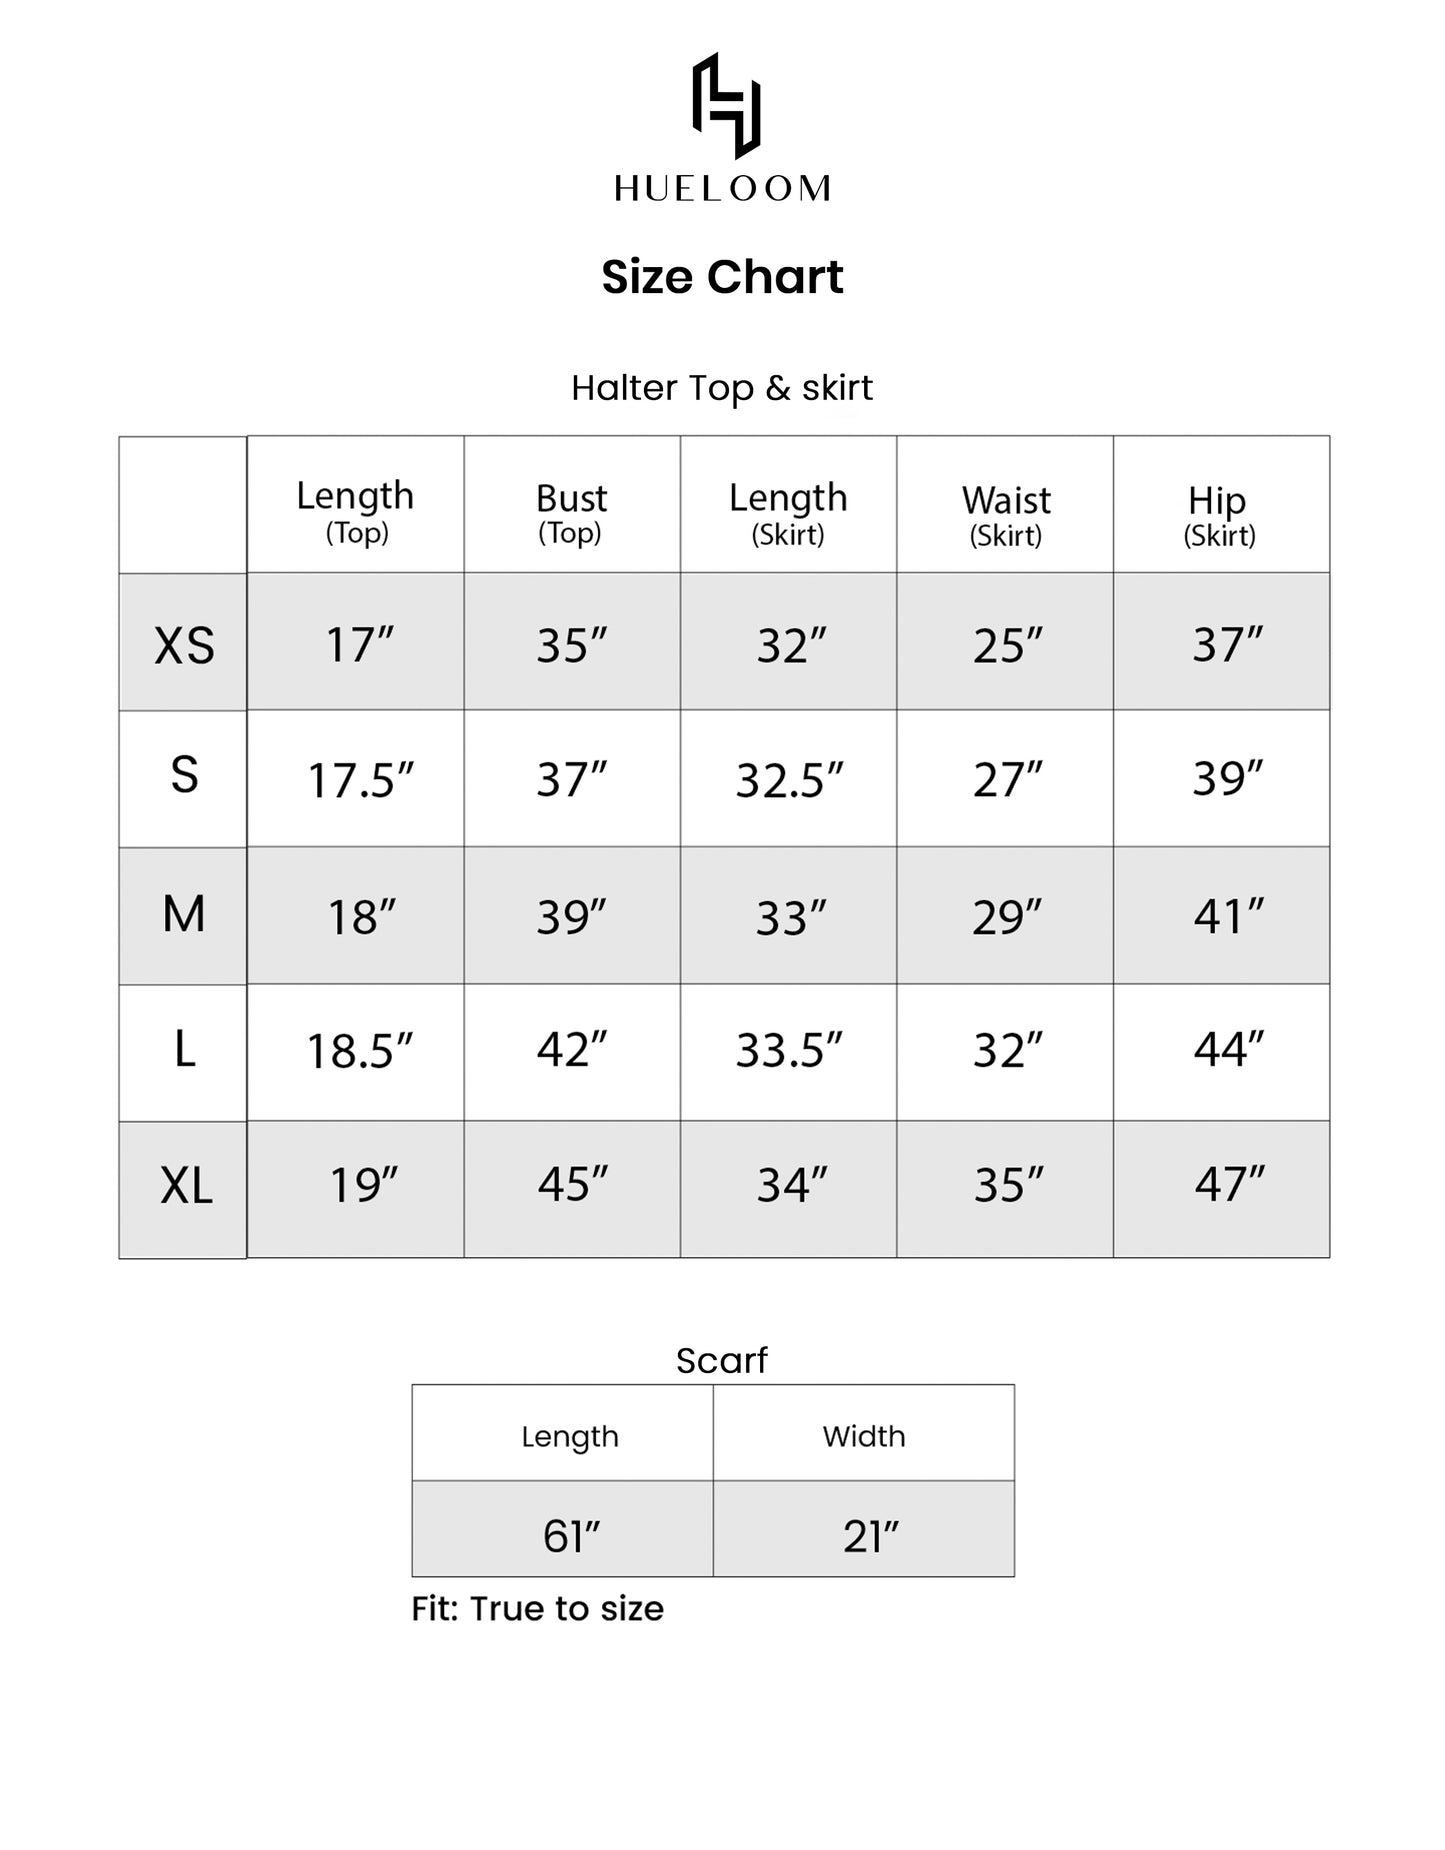 Hueloom's size chart for sizes XS, S, M, L, XL and scarf length guide for allure capsule.